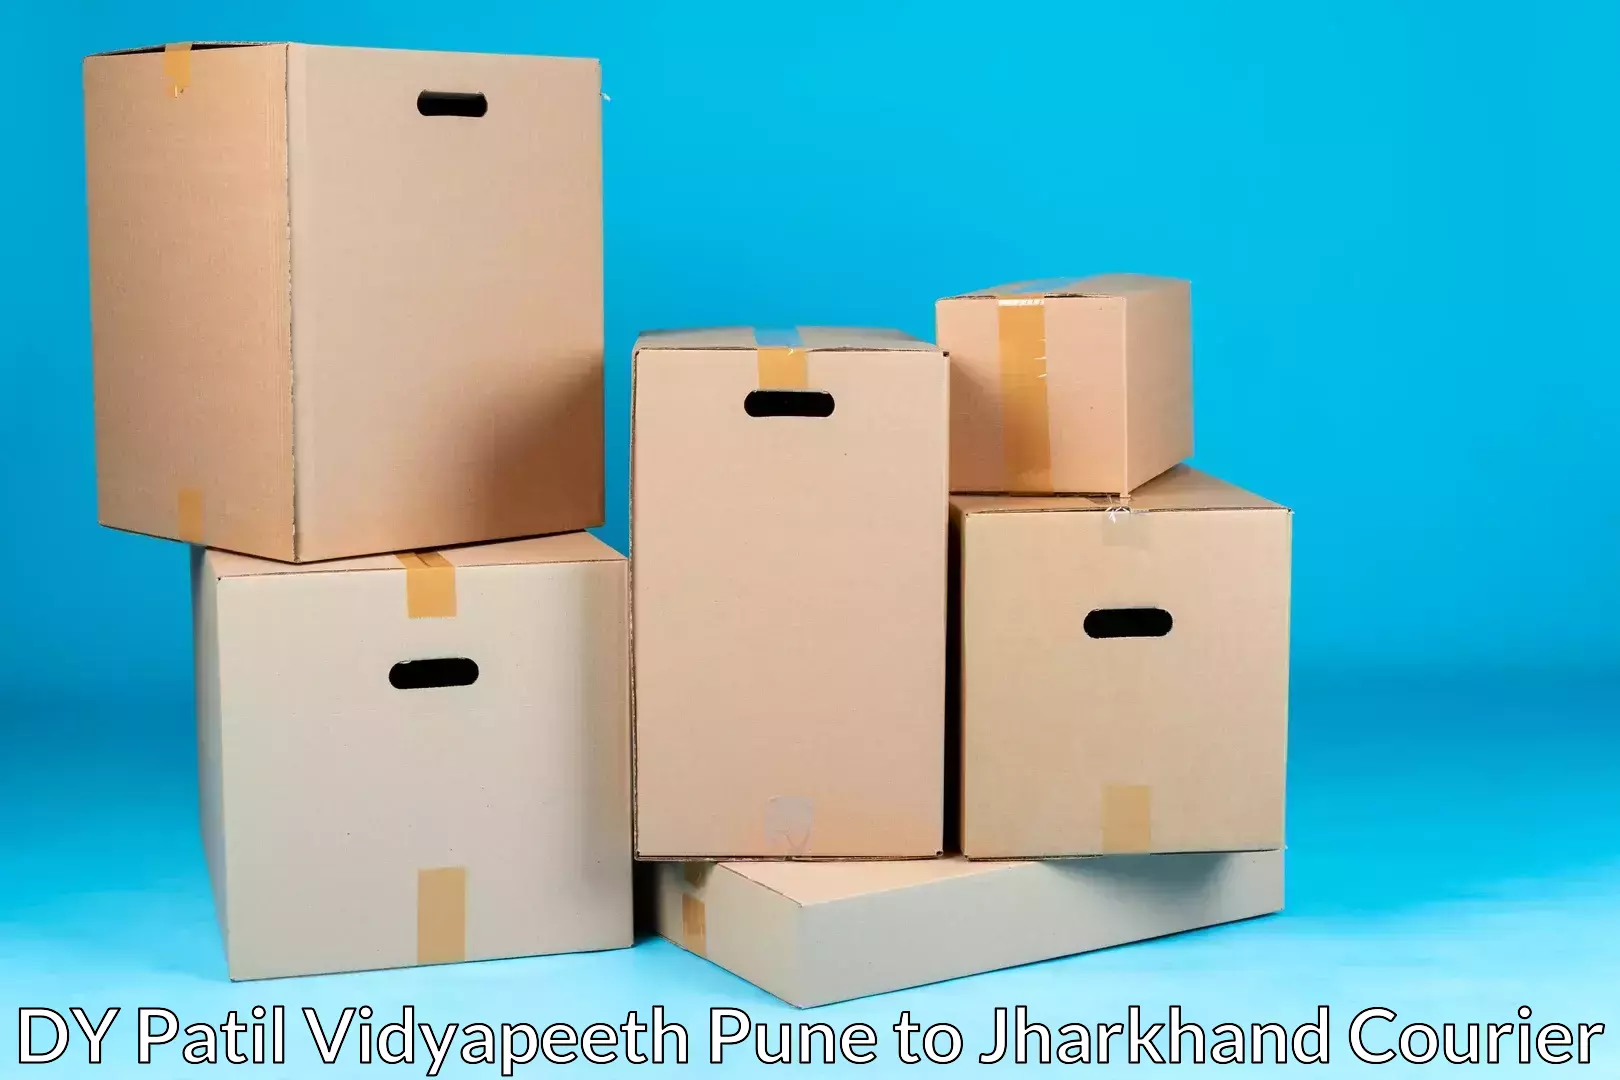 Furniture moving specialists DY Patil Vidyapeeth Pune to Birla Institute of Technology Ranchi